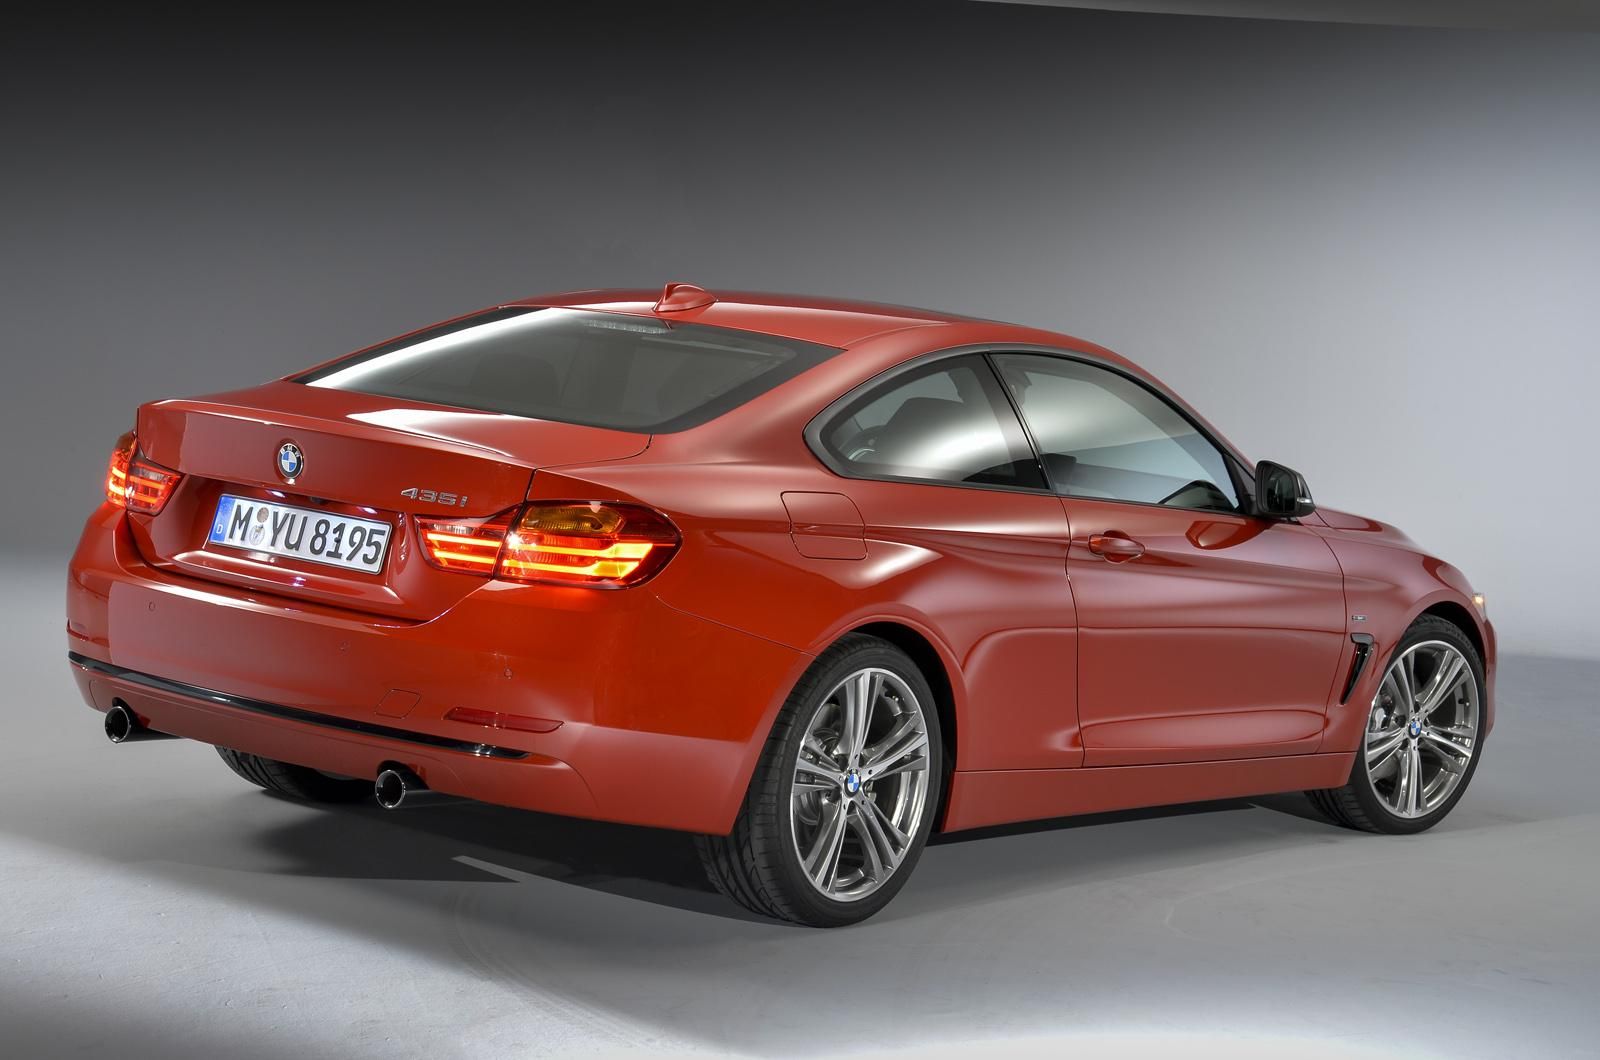 YEN BMW 4 SERS COUPE RESM GALER